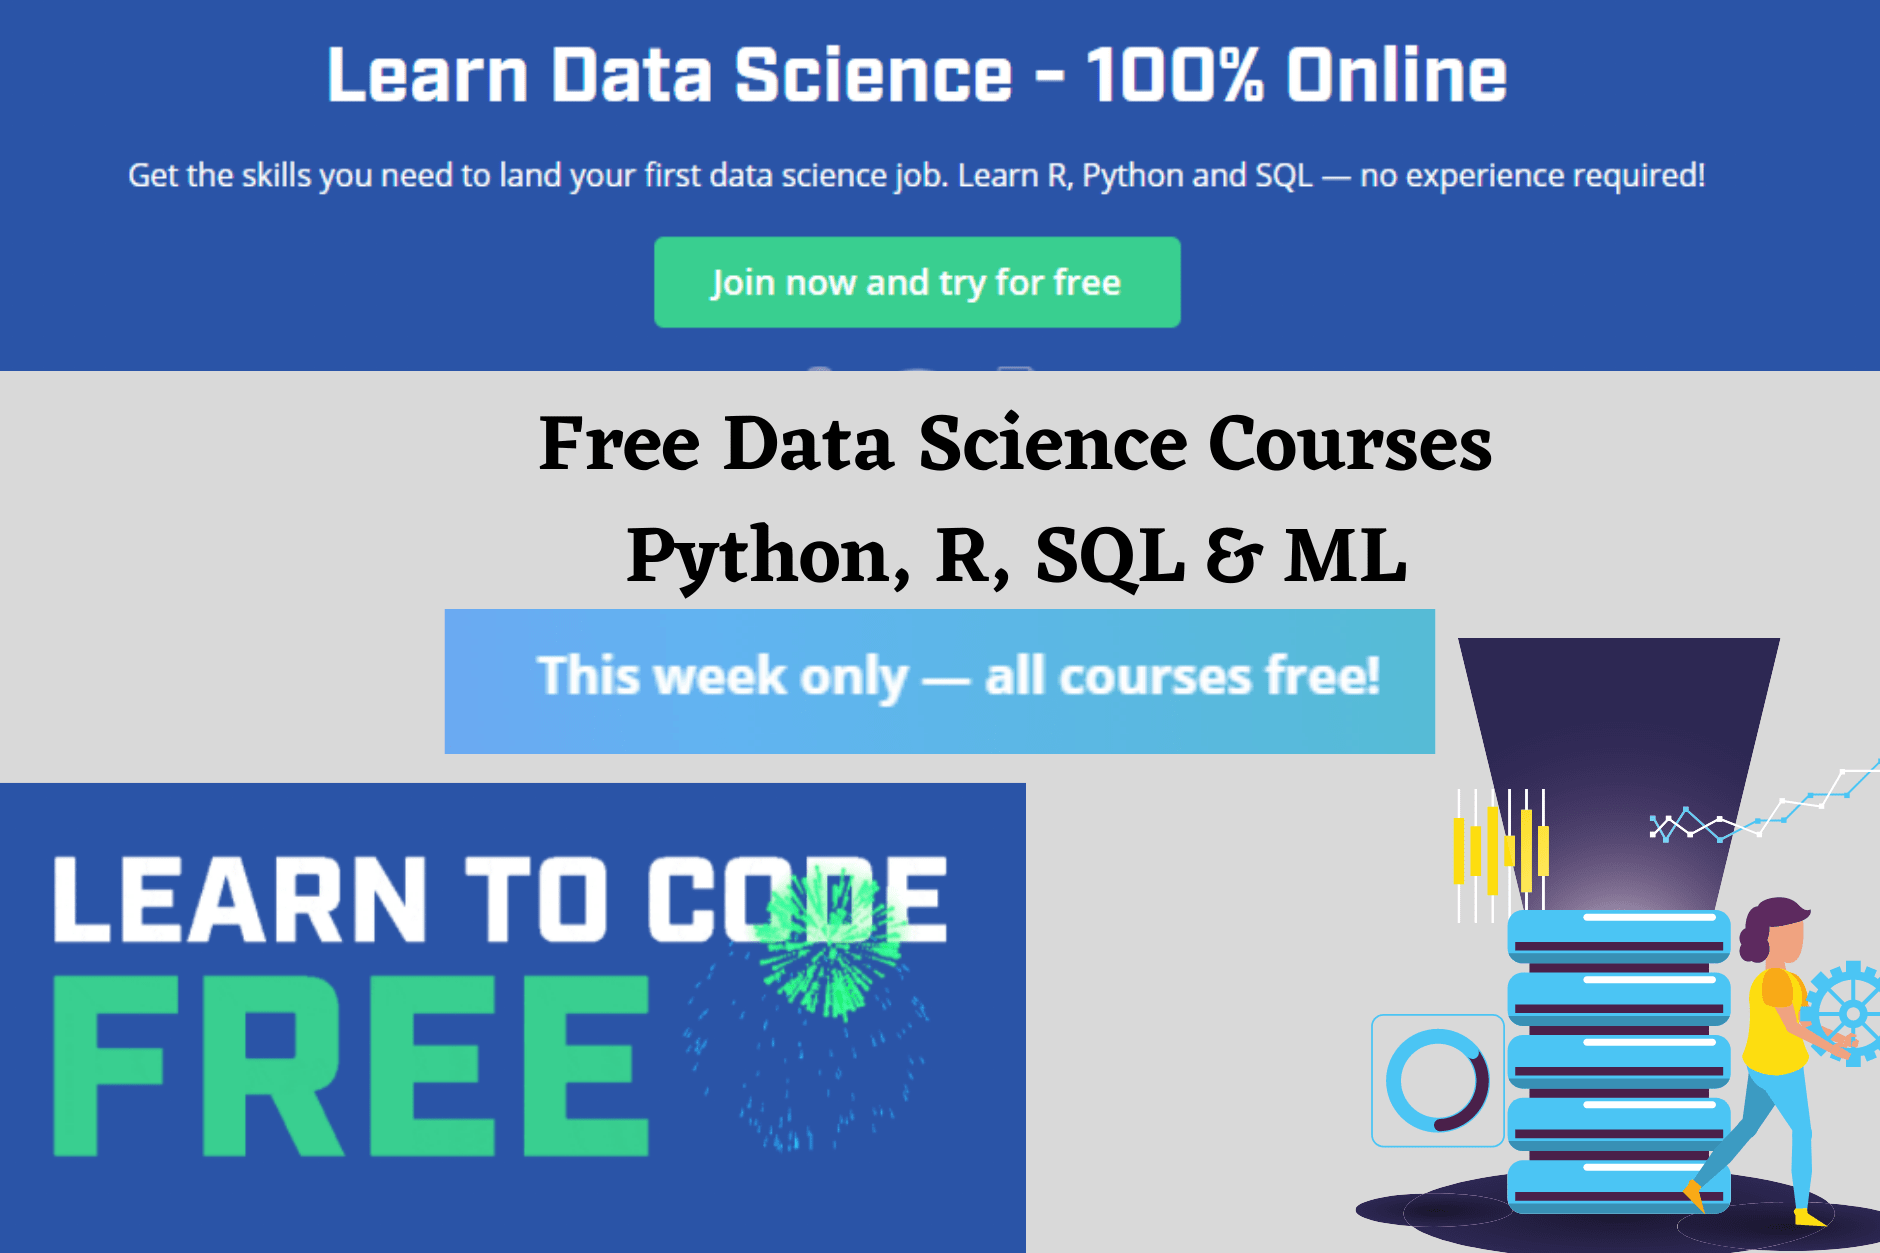 Free datascience courses